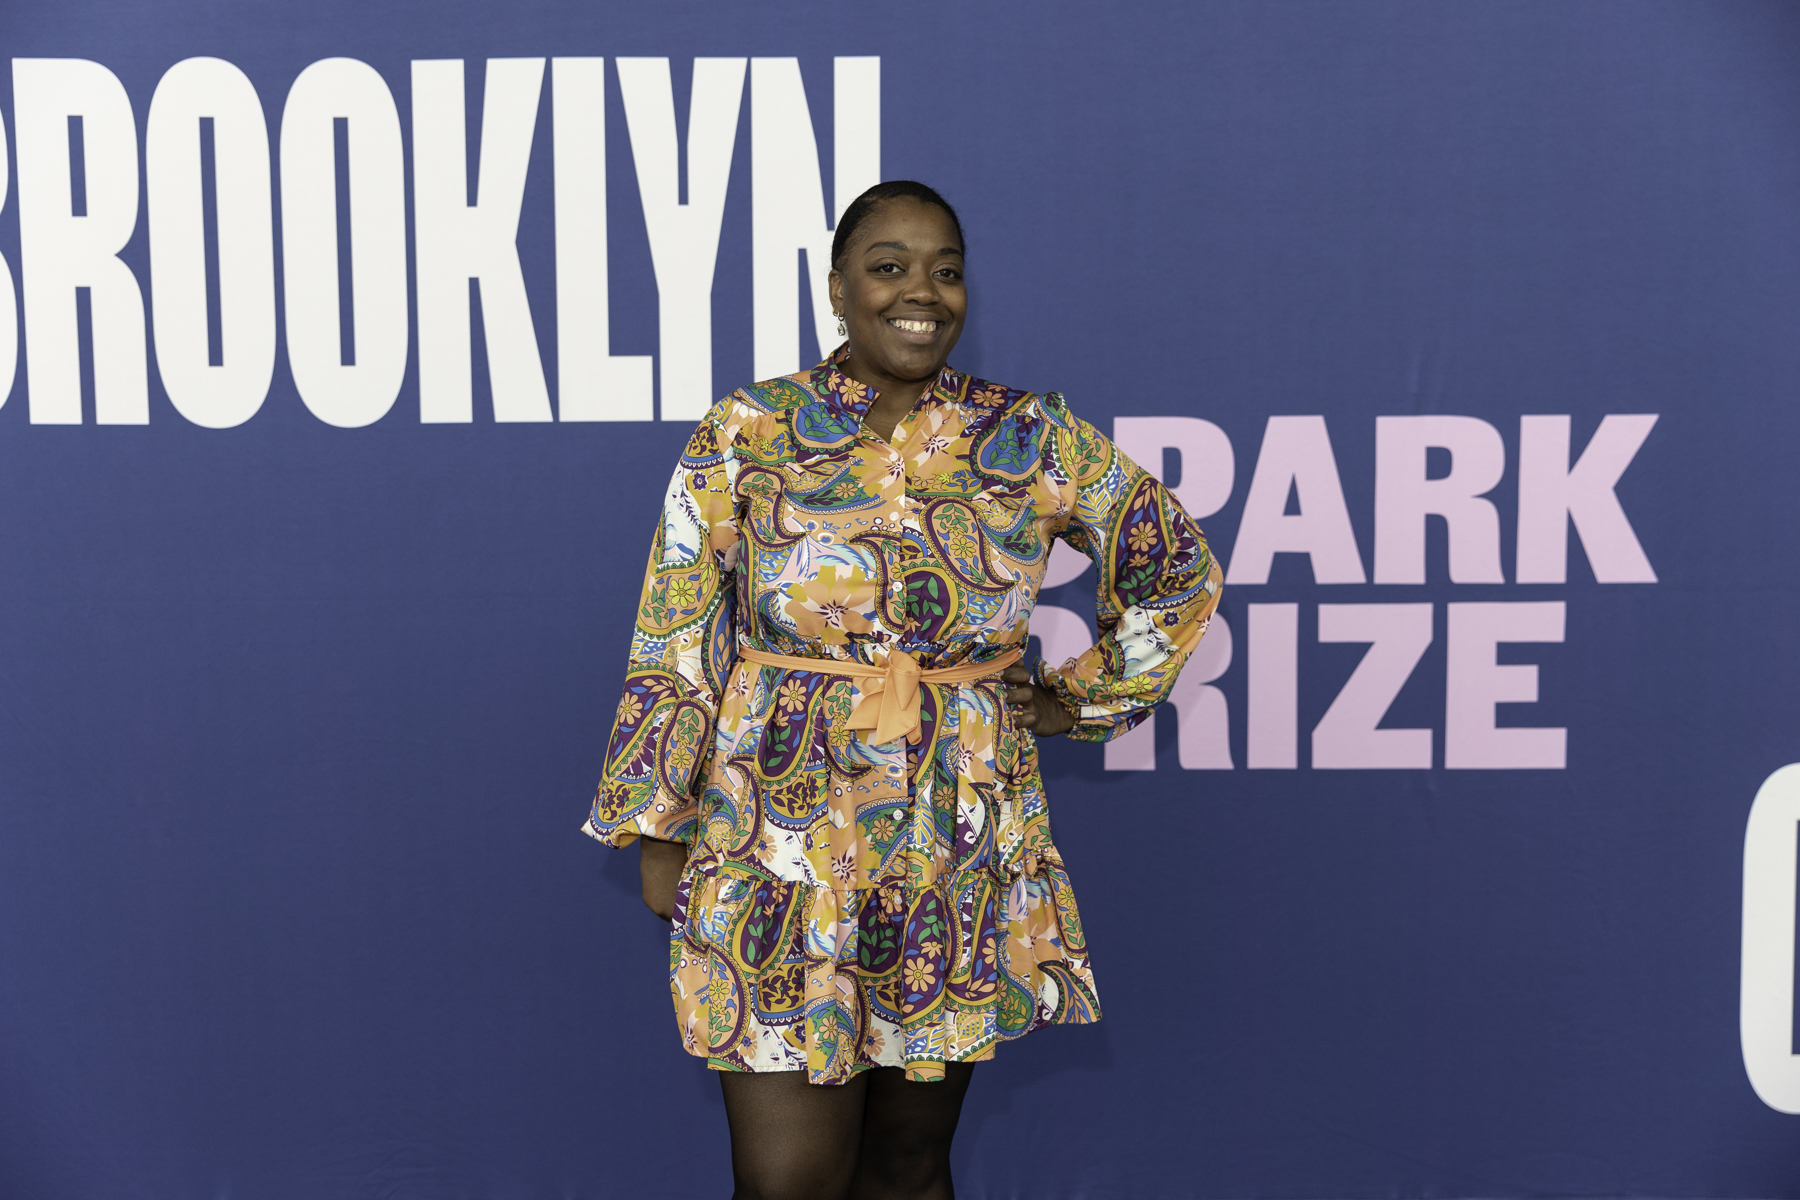 Woman in a patterned dress standing against a backdrop with the text "brooklyn park prize.